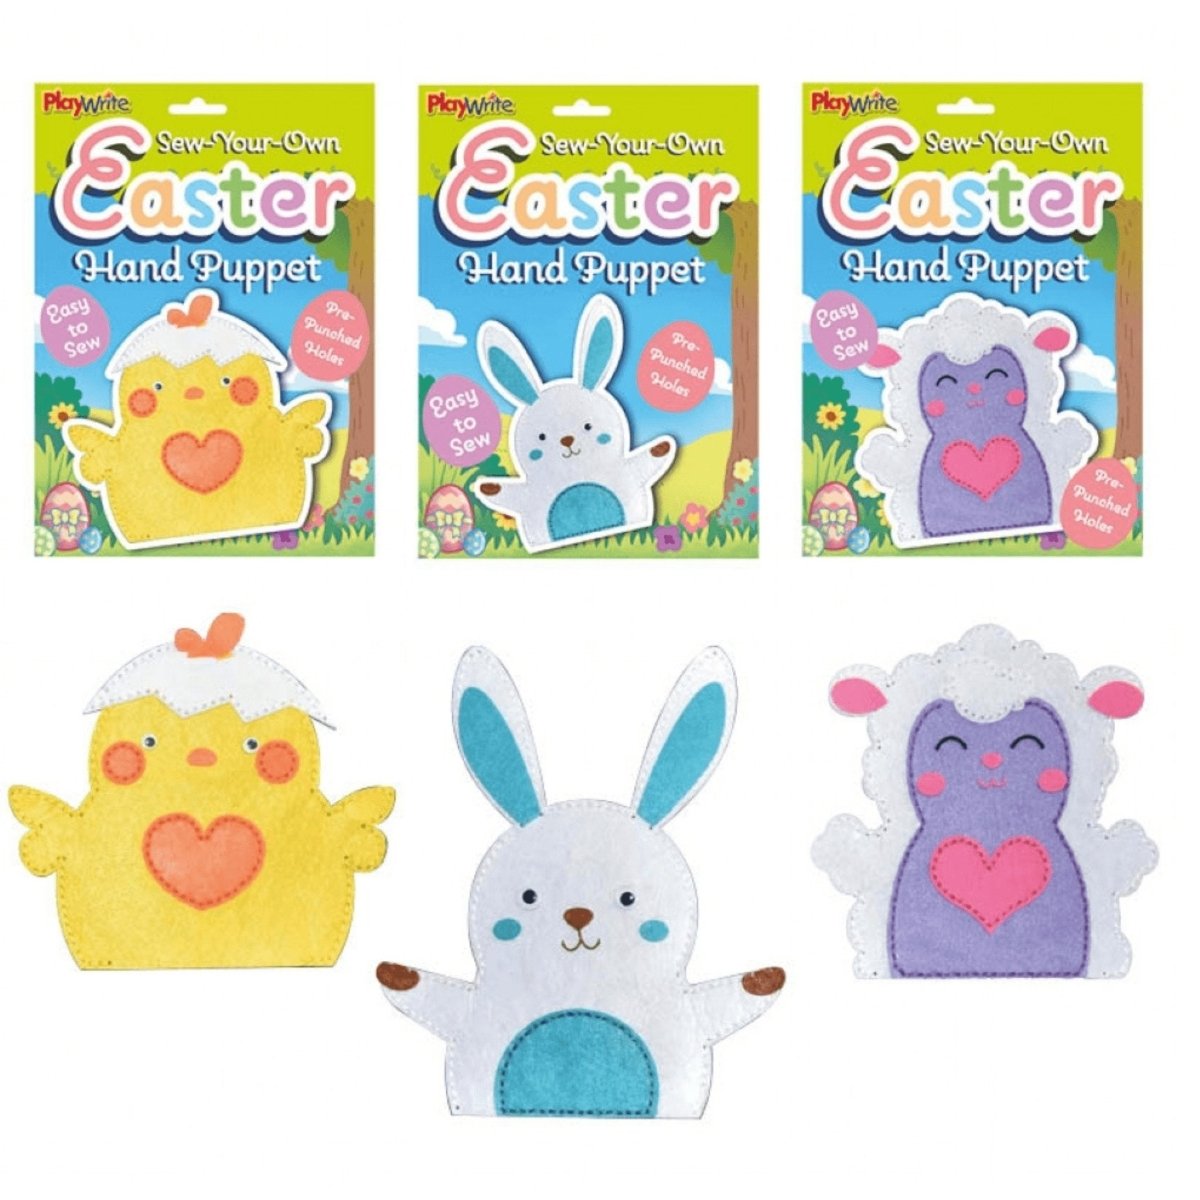 Sew Your Own Easter Hand Puppet - Kids Party Craft